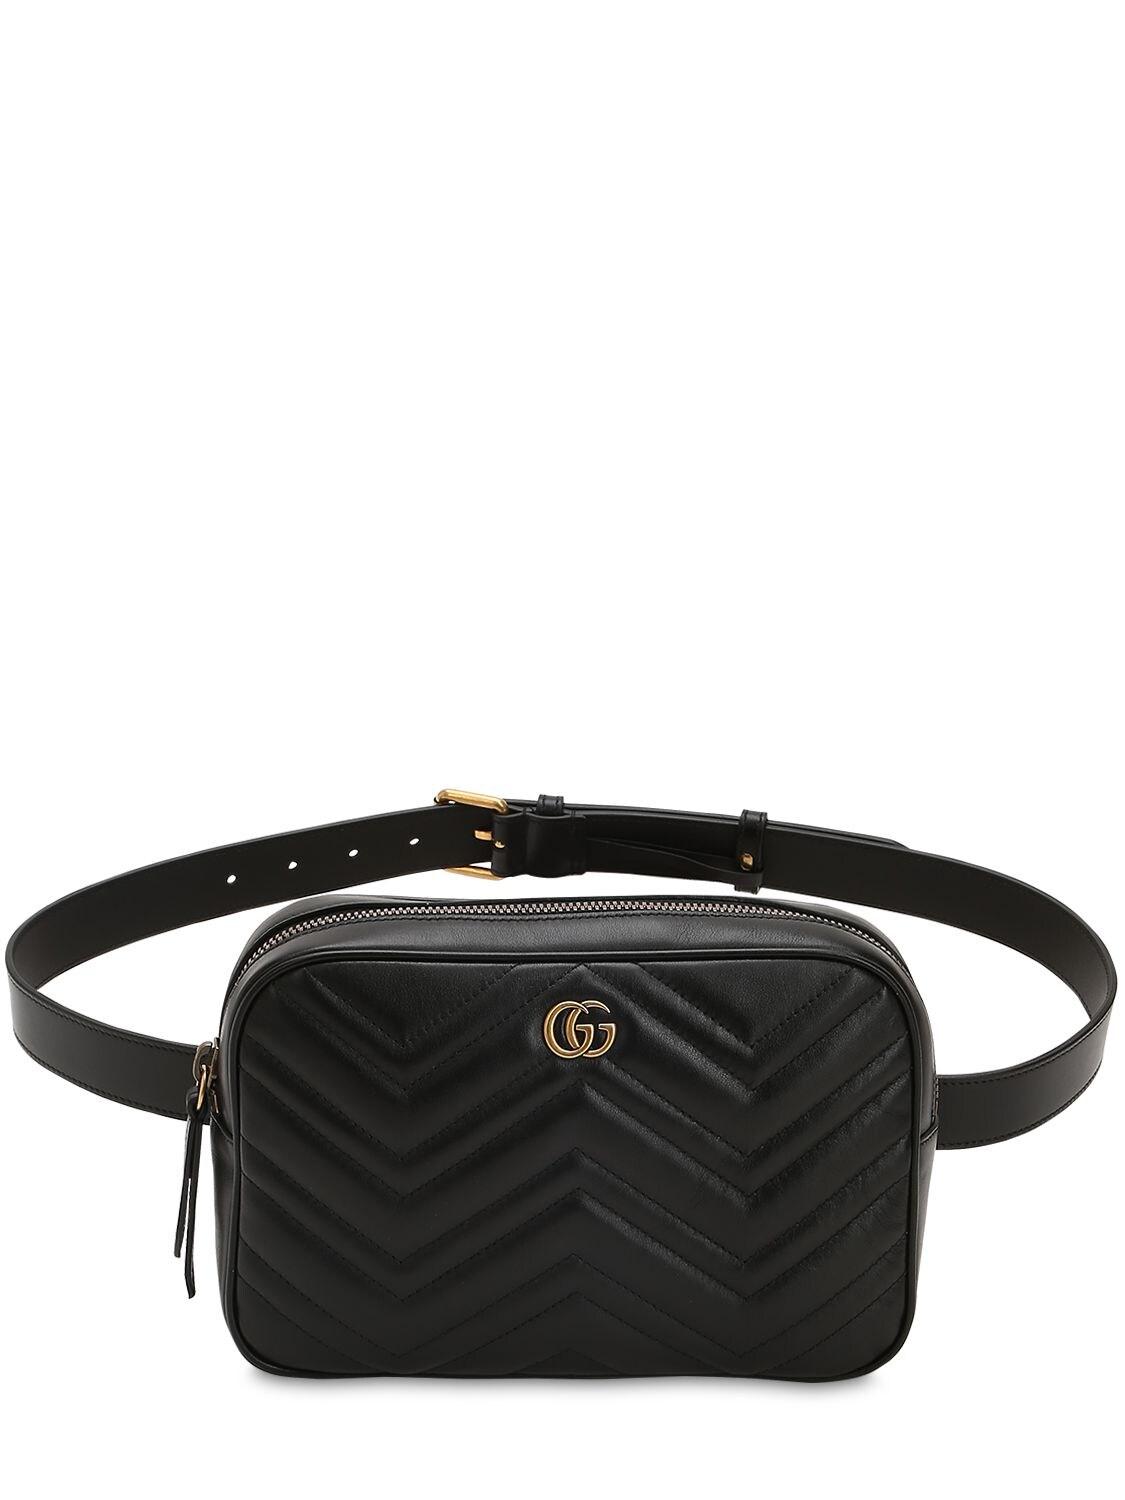 Gucci Marmont Quilted Leather Belt Bag in Black for Men - Lyst